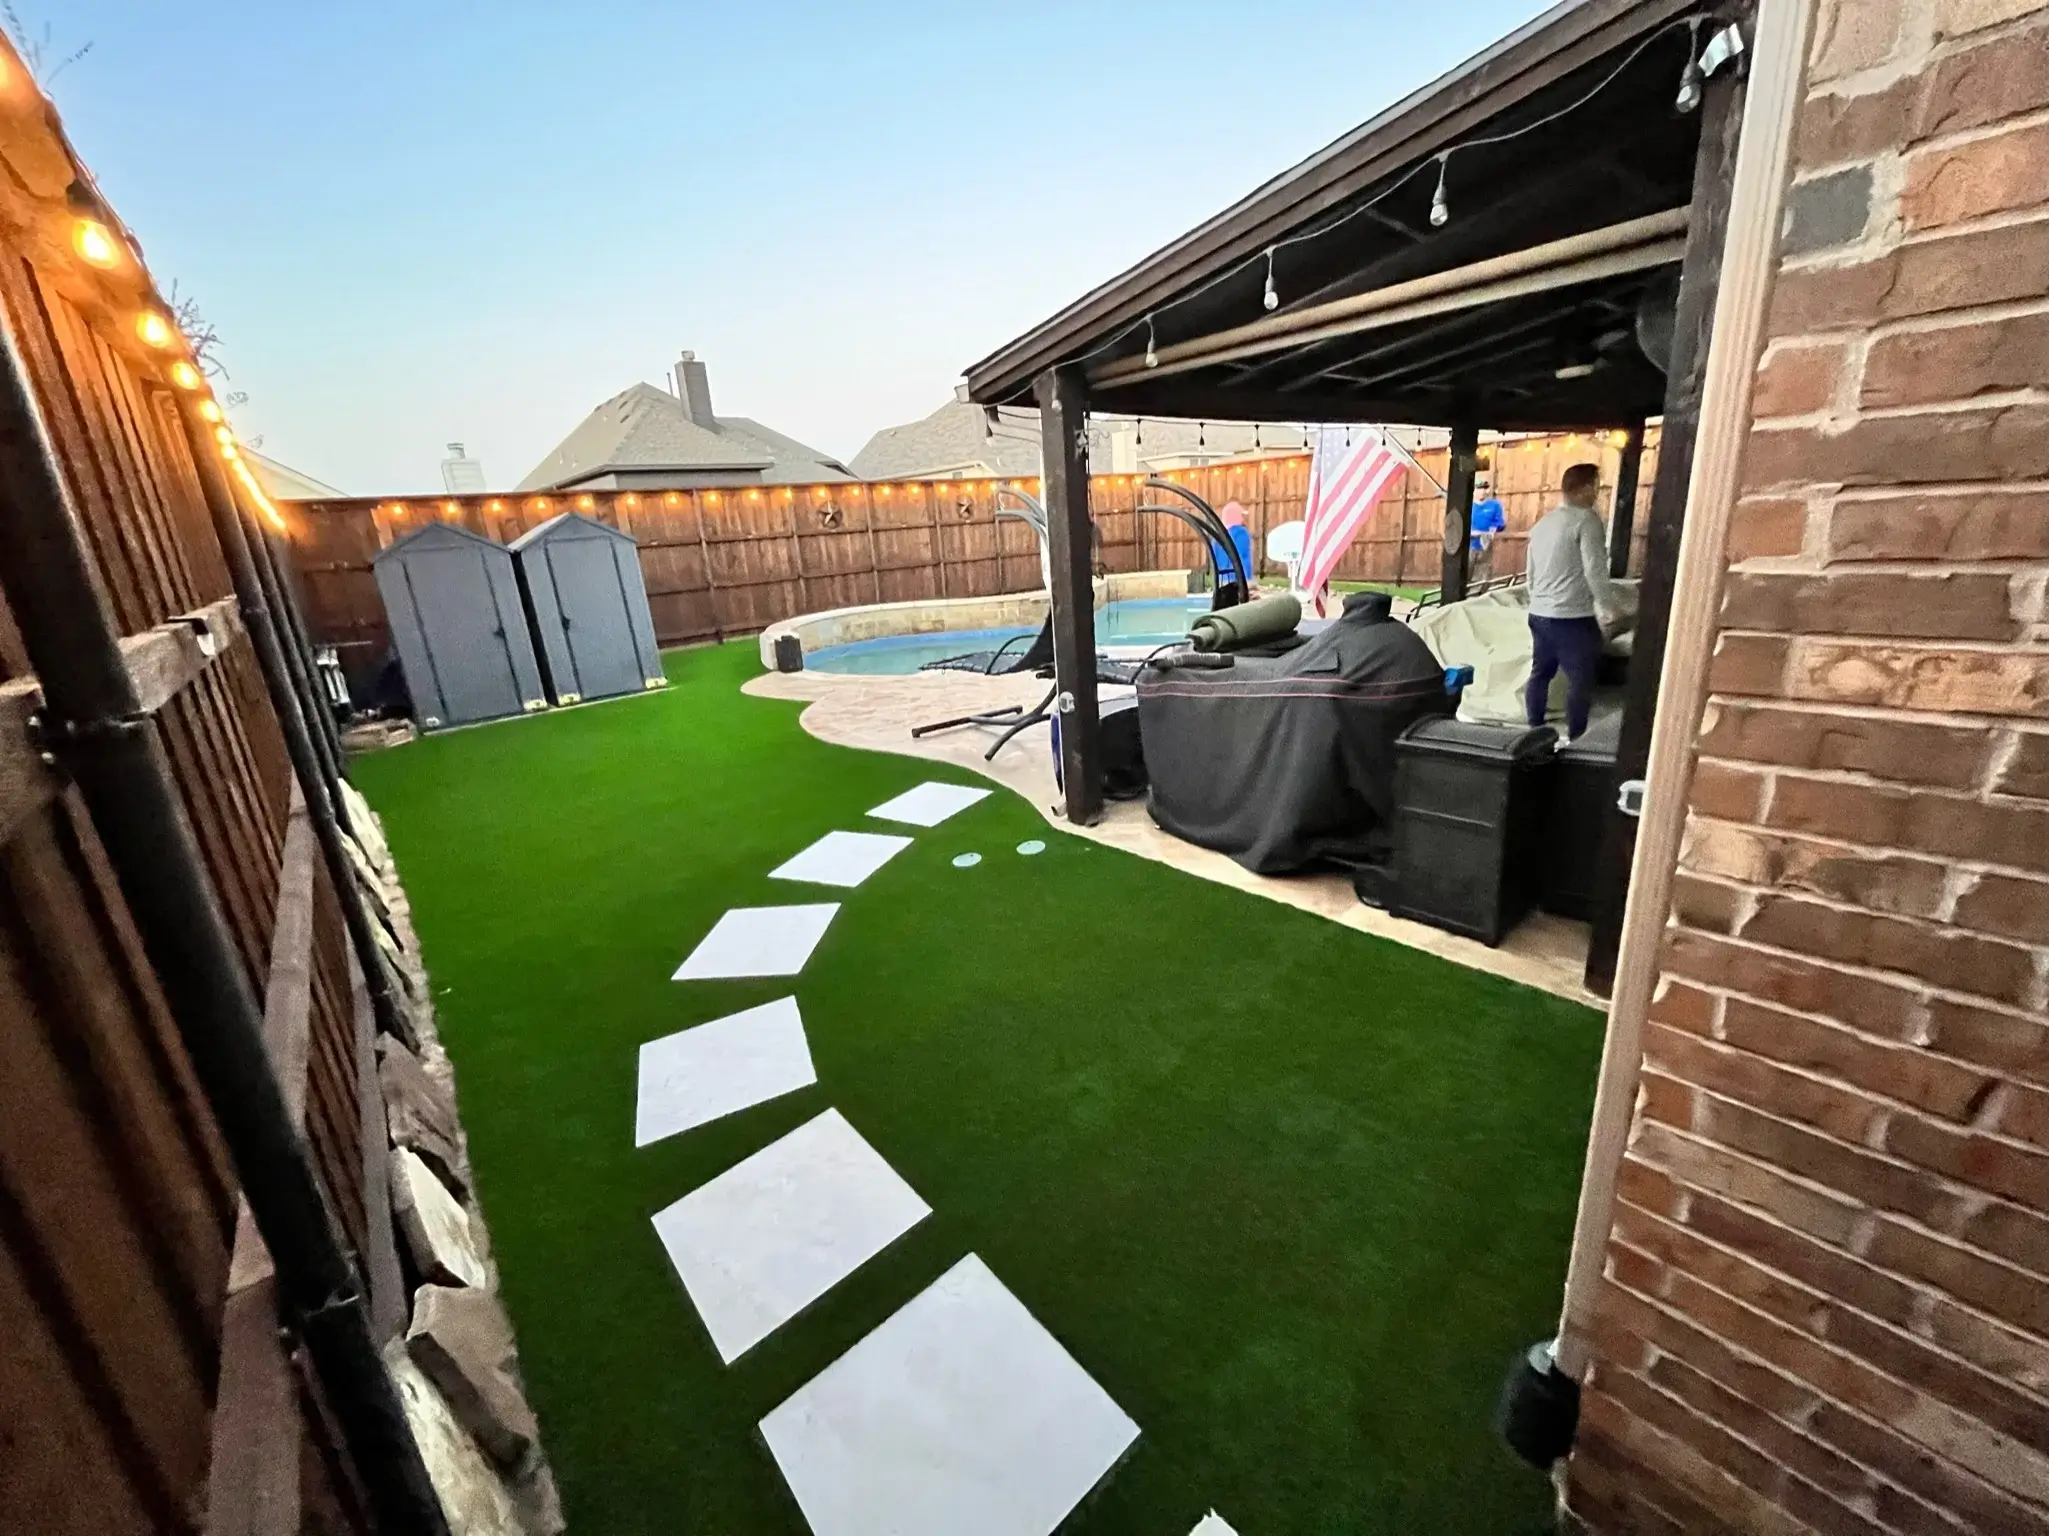 Backyard with artificial grass and pathway leading to a covered patio and pool area with ambient lighting at dusk.